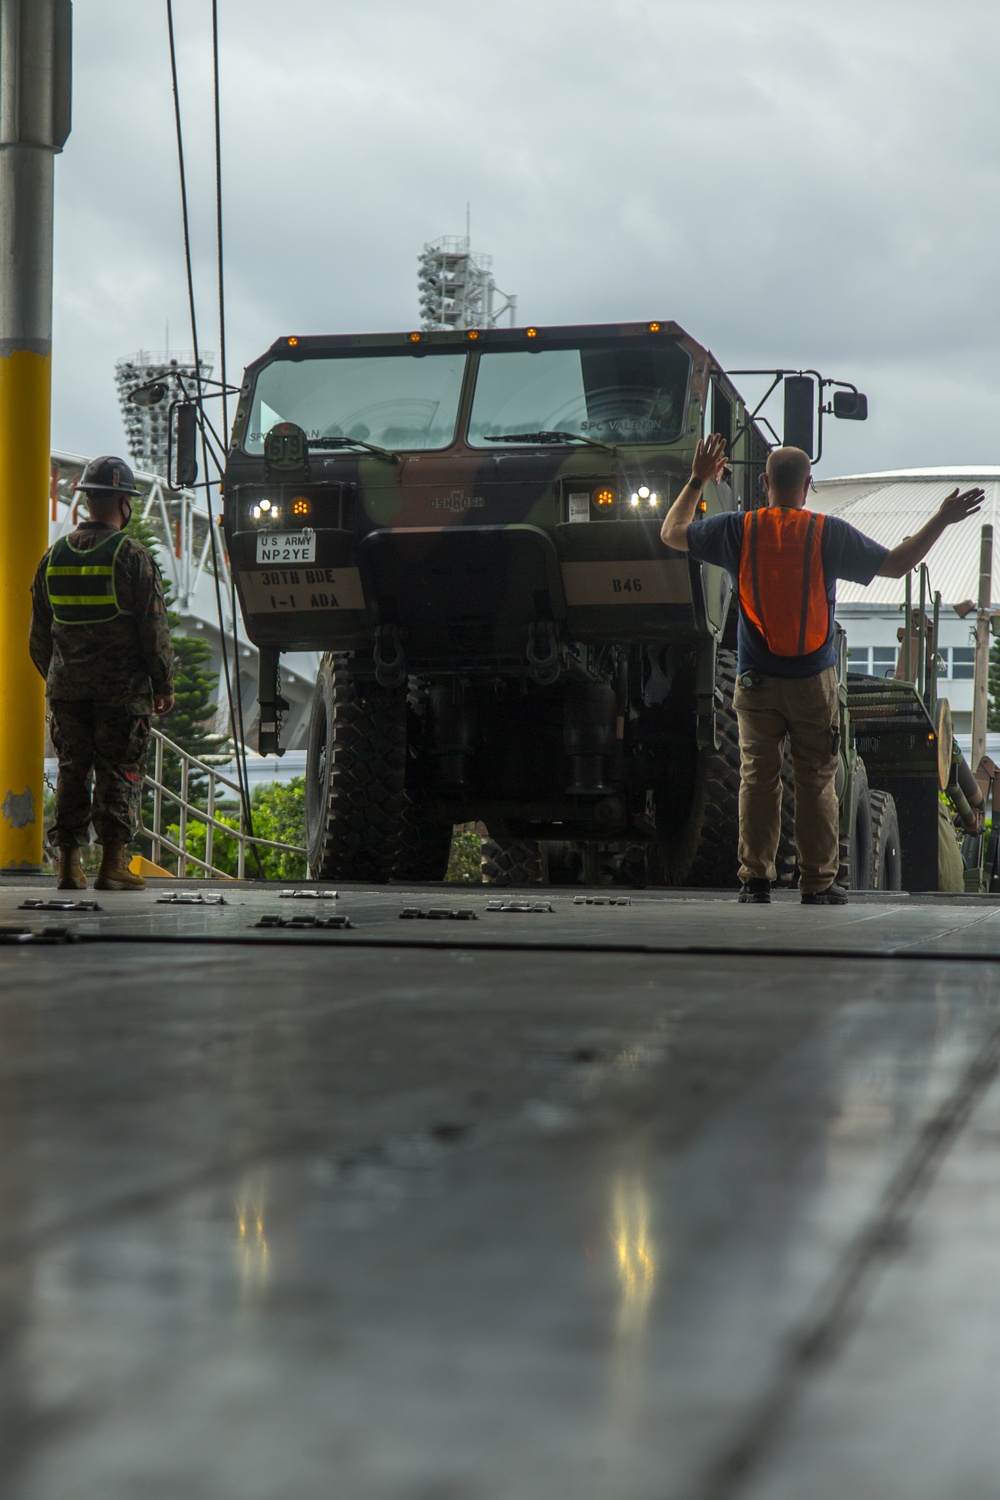 III Marine Expeditionary Force and U.S. Army 1st Battalion, 1st Air Defense Artillery, load cargo during Joint Mobility Exercise with USNS Guam